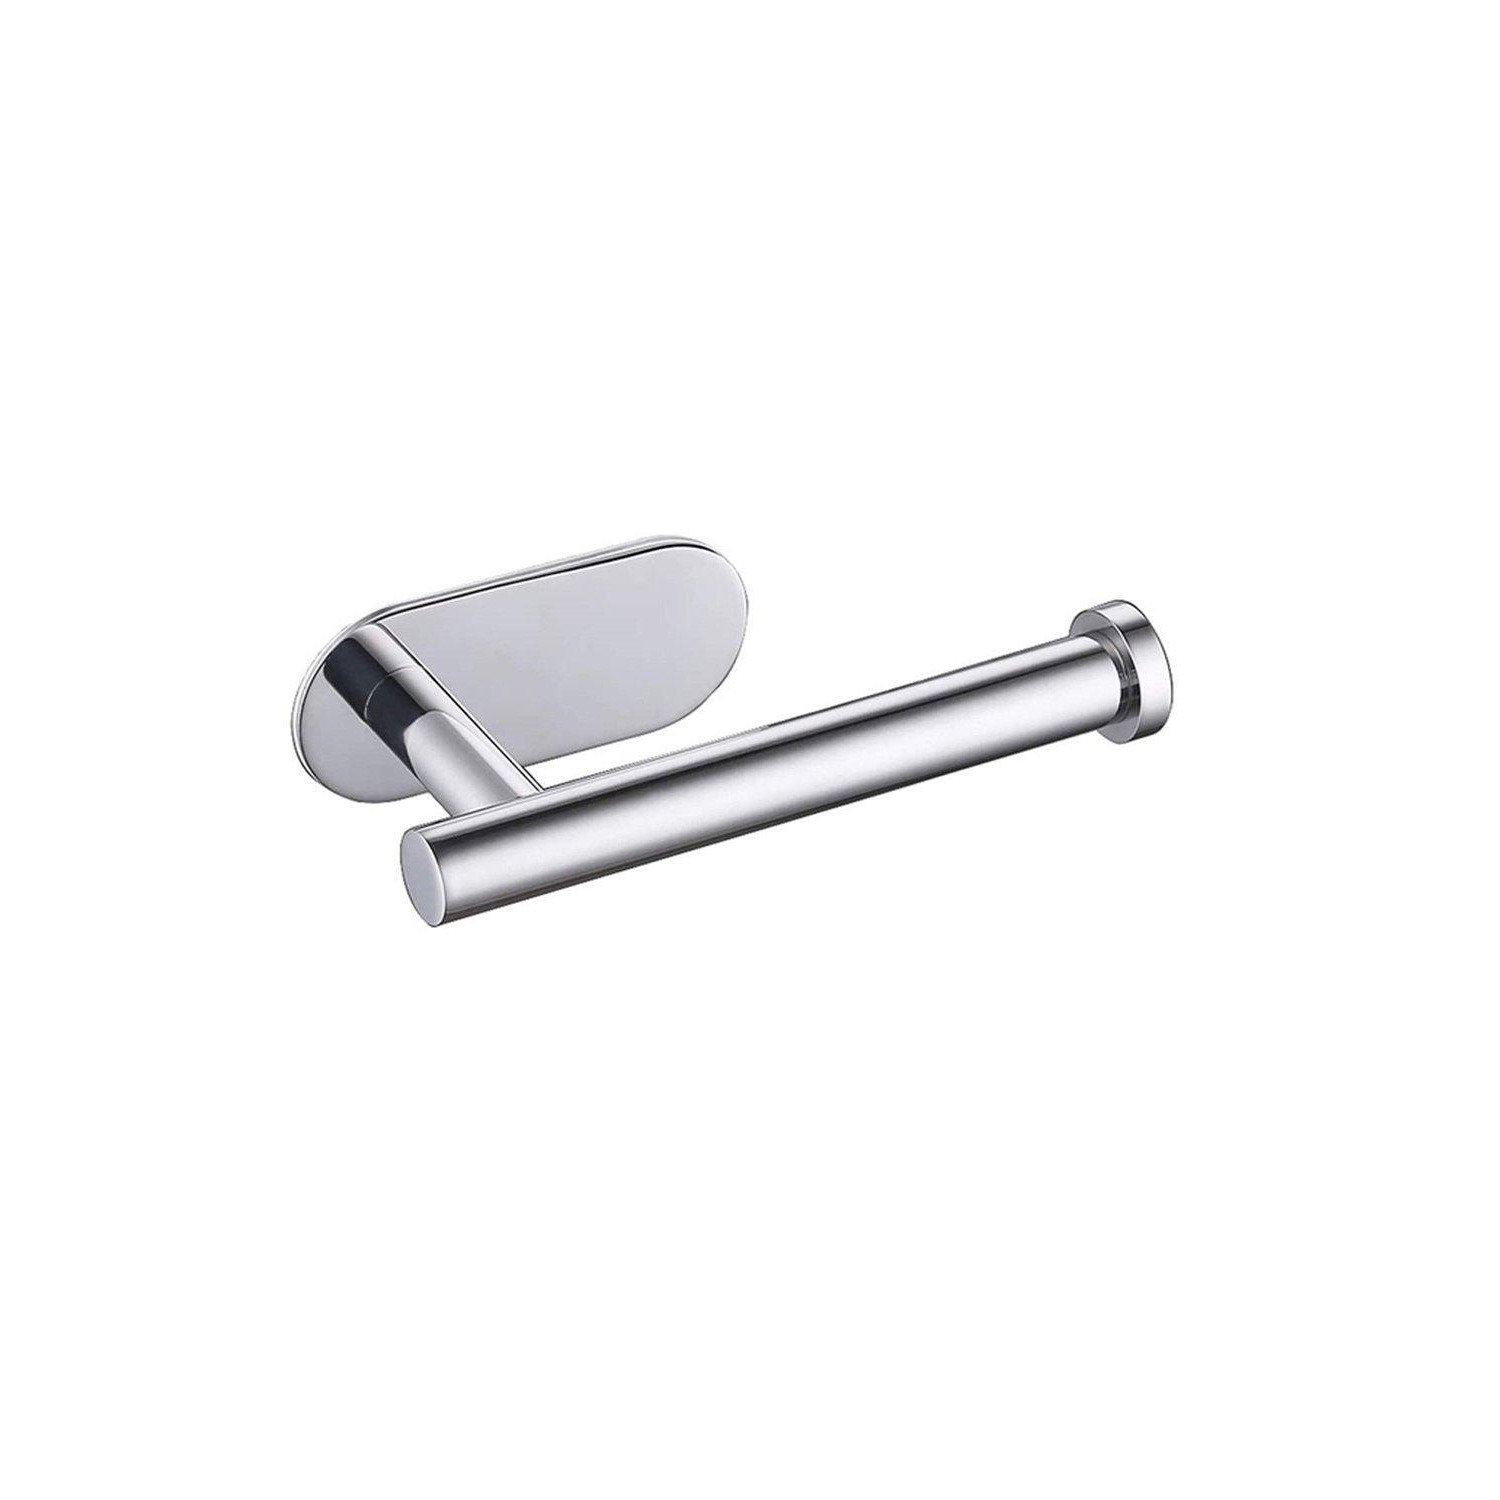 Wall Mounted Stainless Steel Toilet Paper Roll Holder for Bathroom - image 1